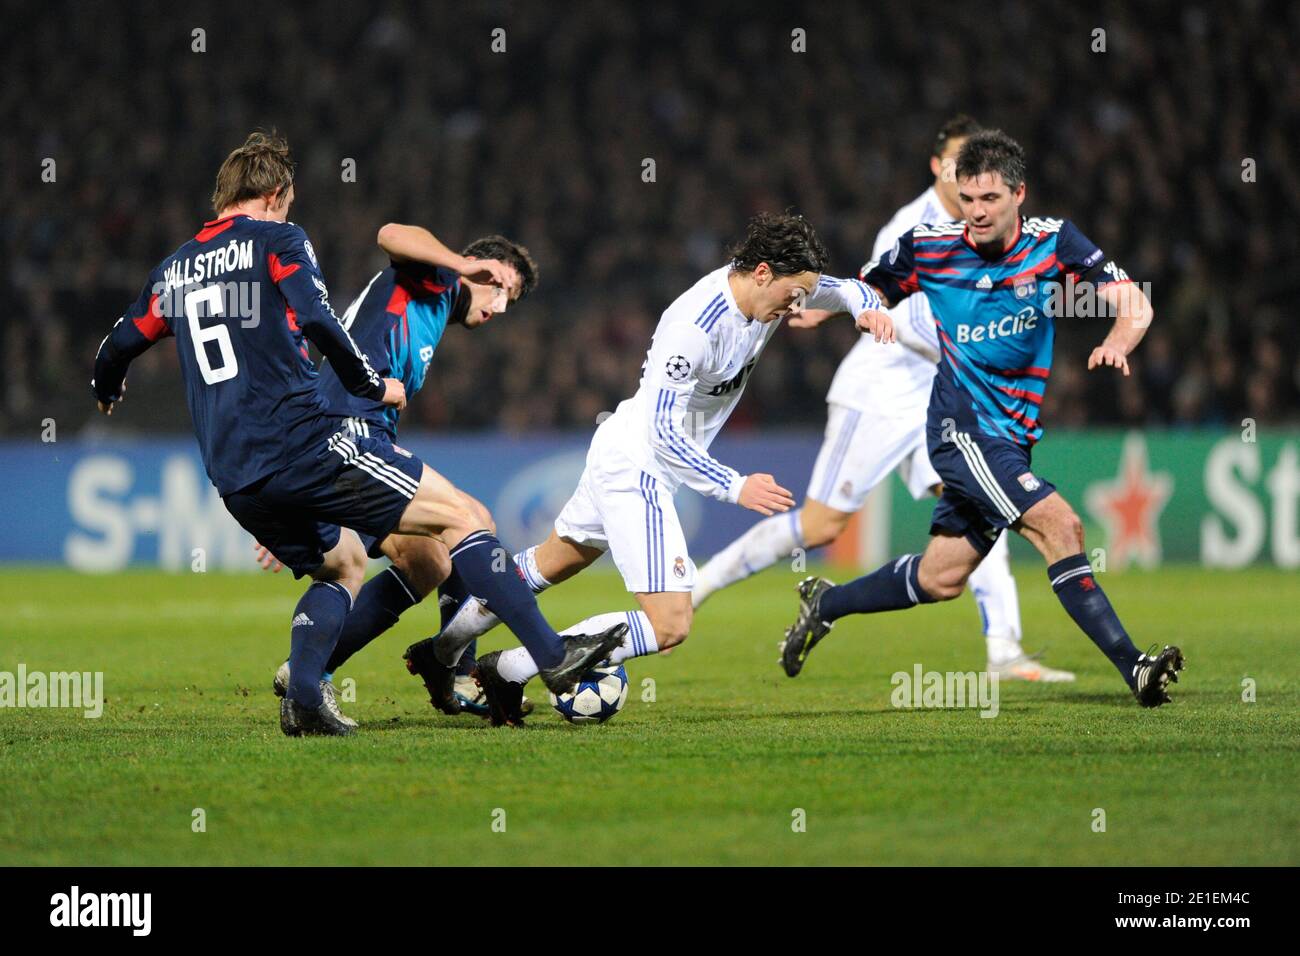 Real Madrid's Mesut Ozil during the Champion's League 1/8 of final soccer match, Lyon vs Real Madrid in Lyon, France, on February 22nd, 2011. Lyon and Real Madrid drew 1-1. Photo by Henri Szwarc/ABACAPRESS.COM Stock Photo